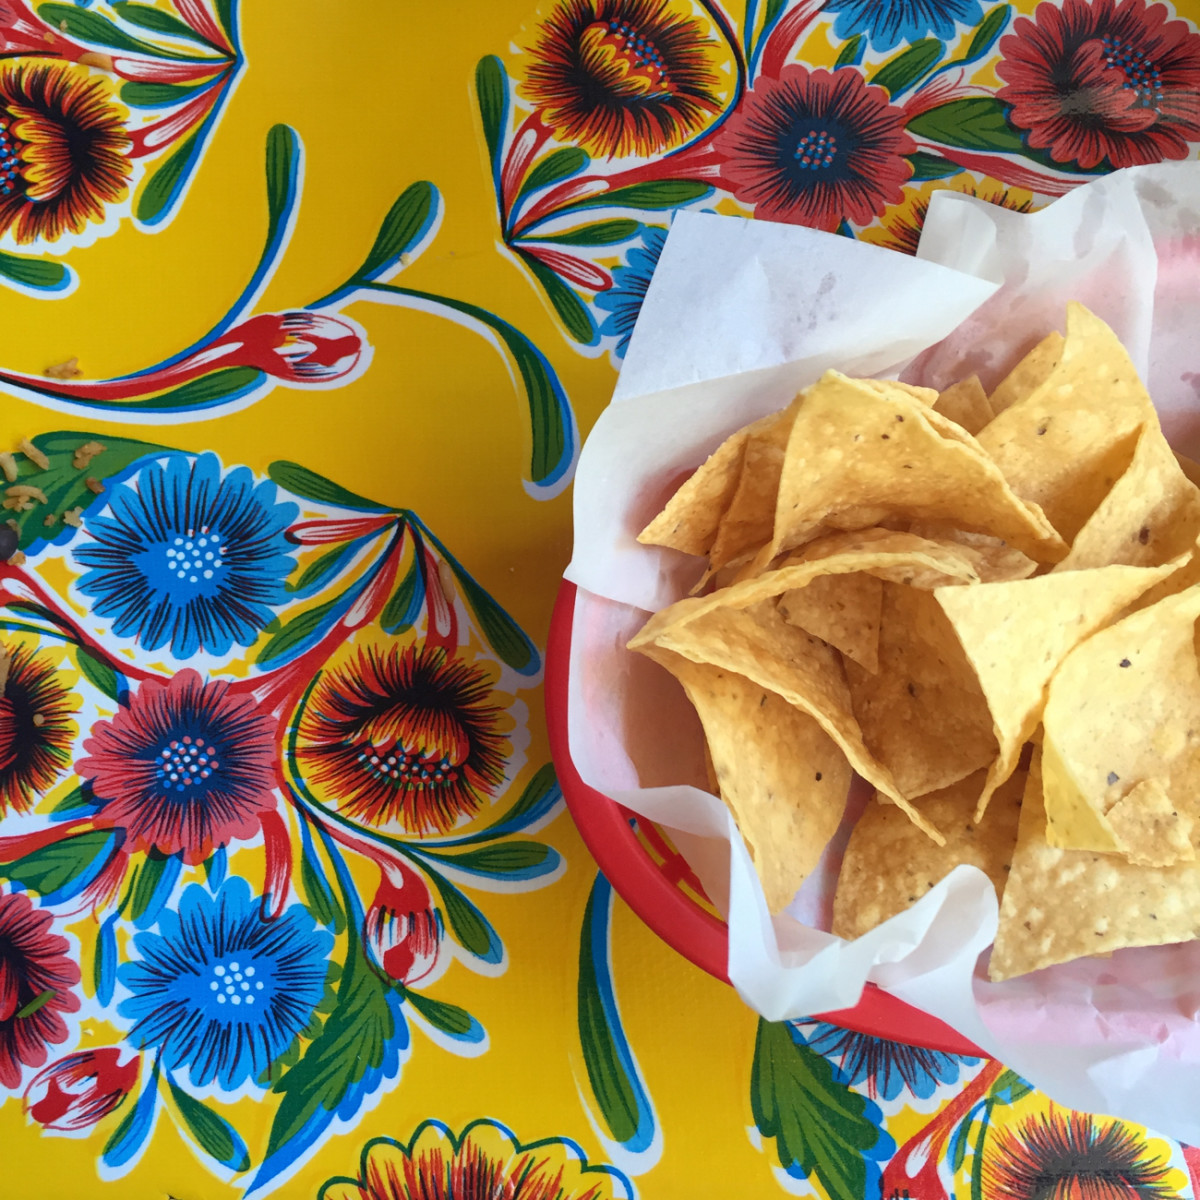 {Not pictured: salsa and margaritas at our favorite Mexican spot in Mill Valley}